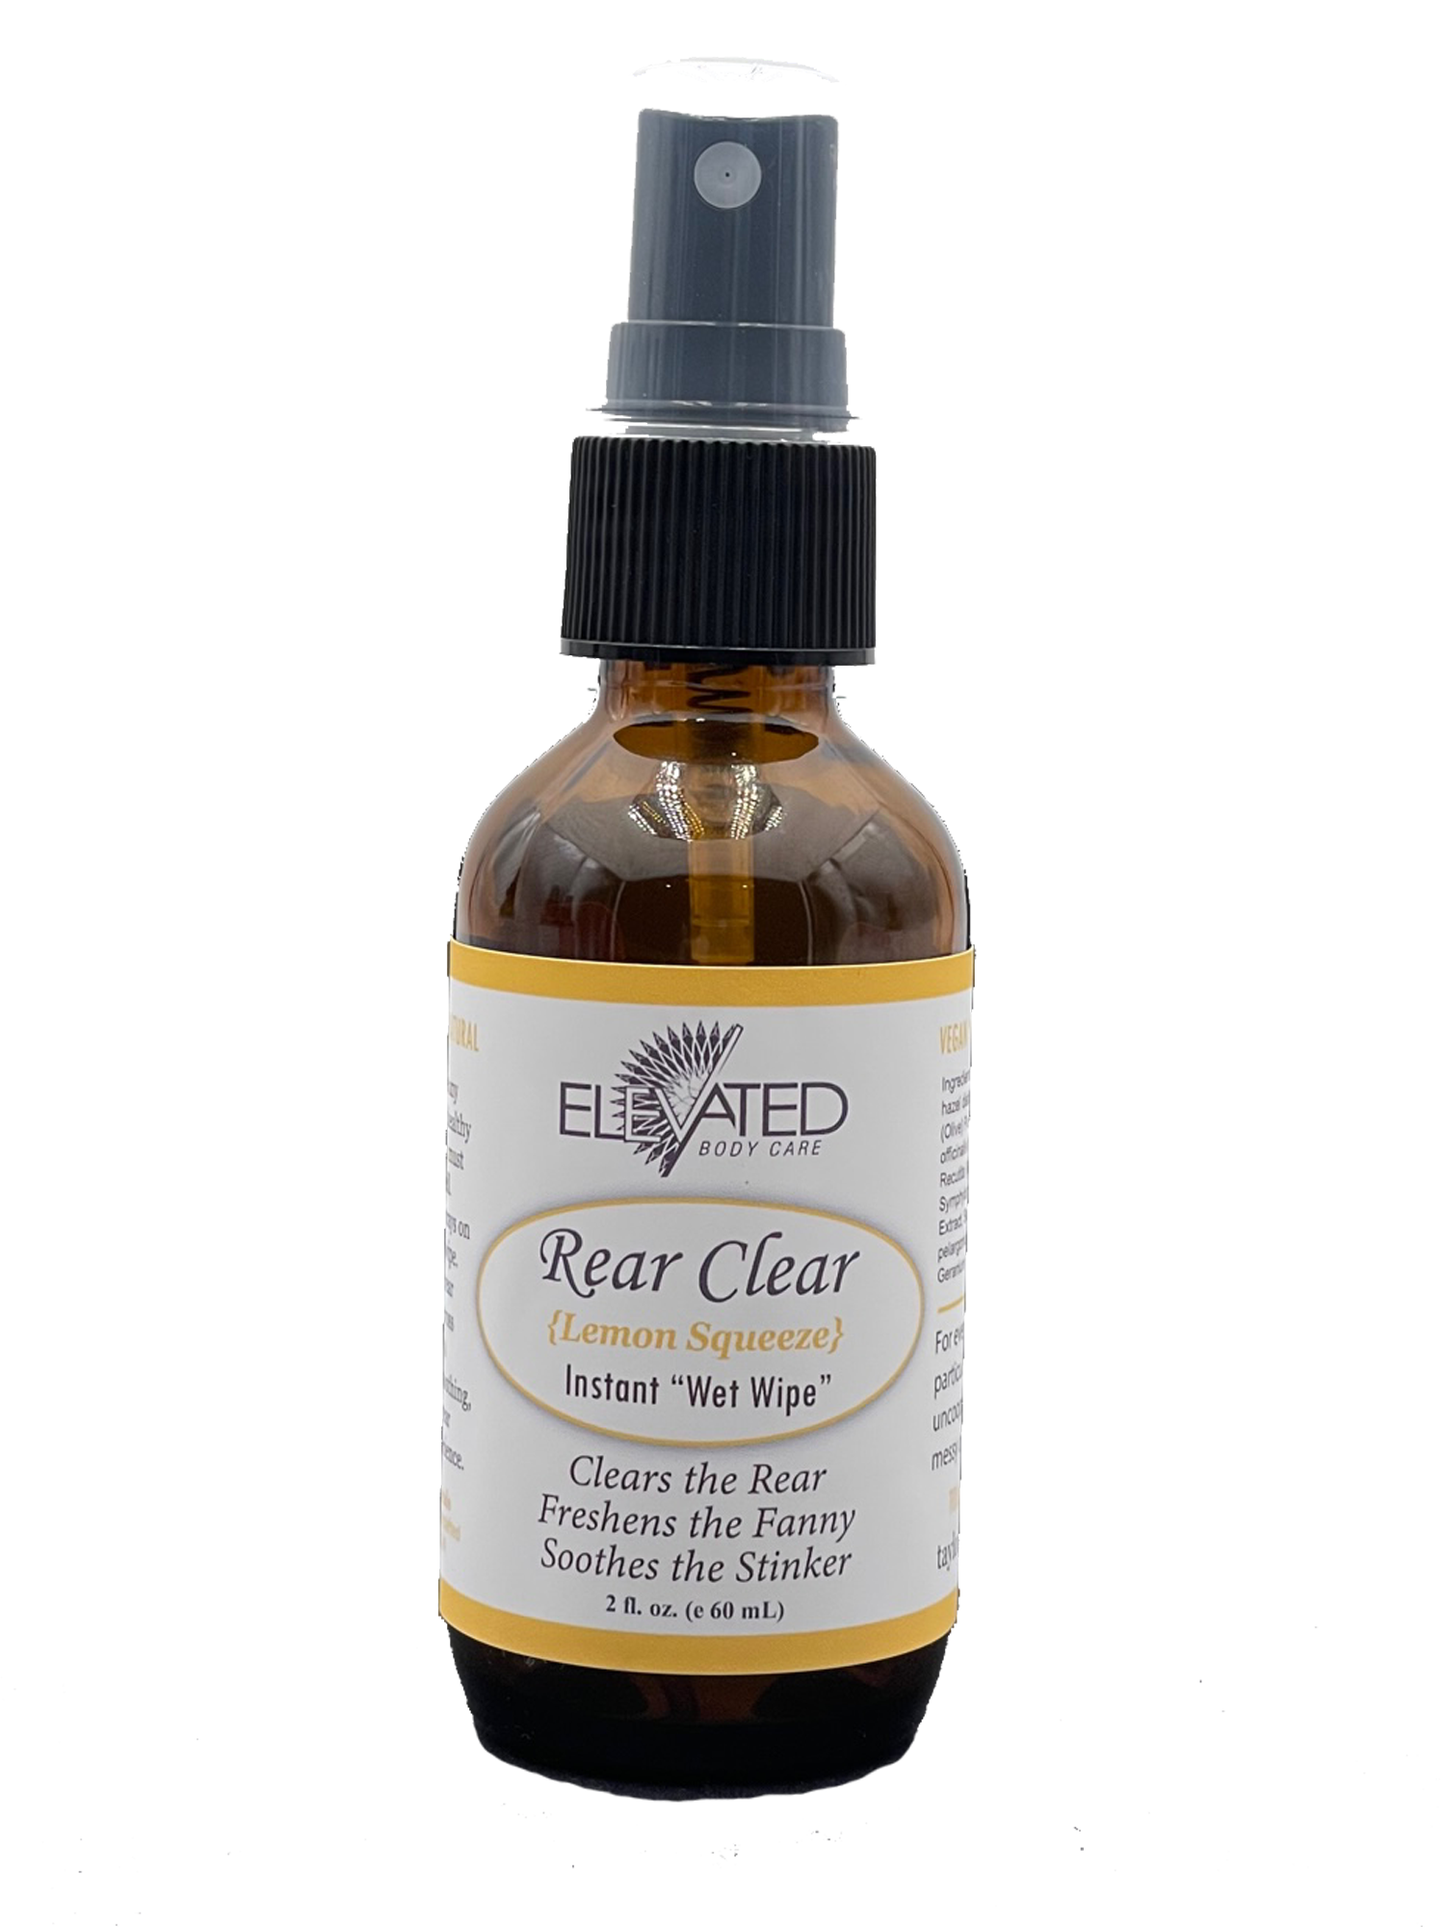 ELEVATED - Rear Clear Spray - Toilet Paper Spray • Instant "wet-wipe"